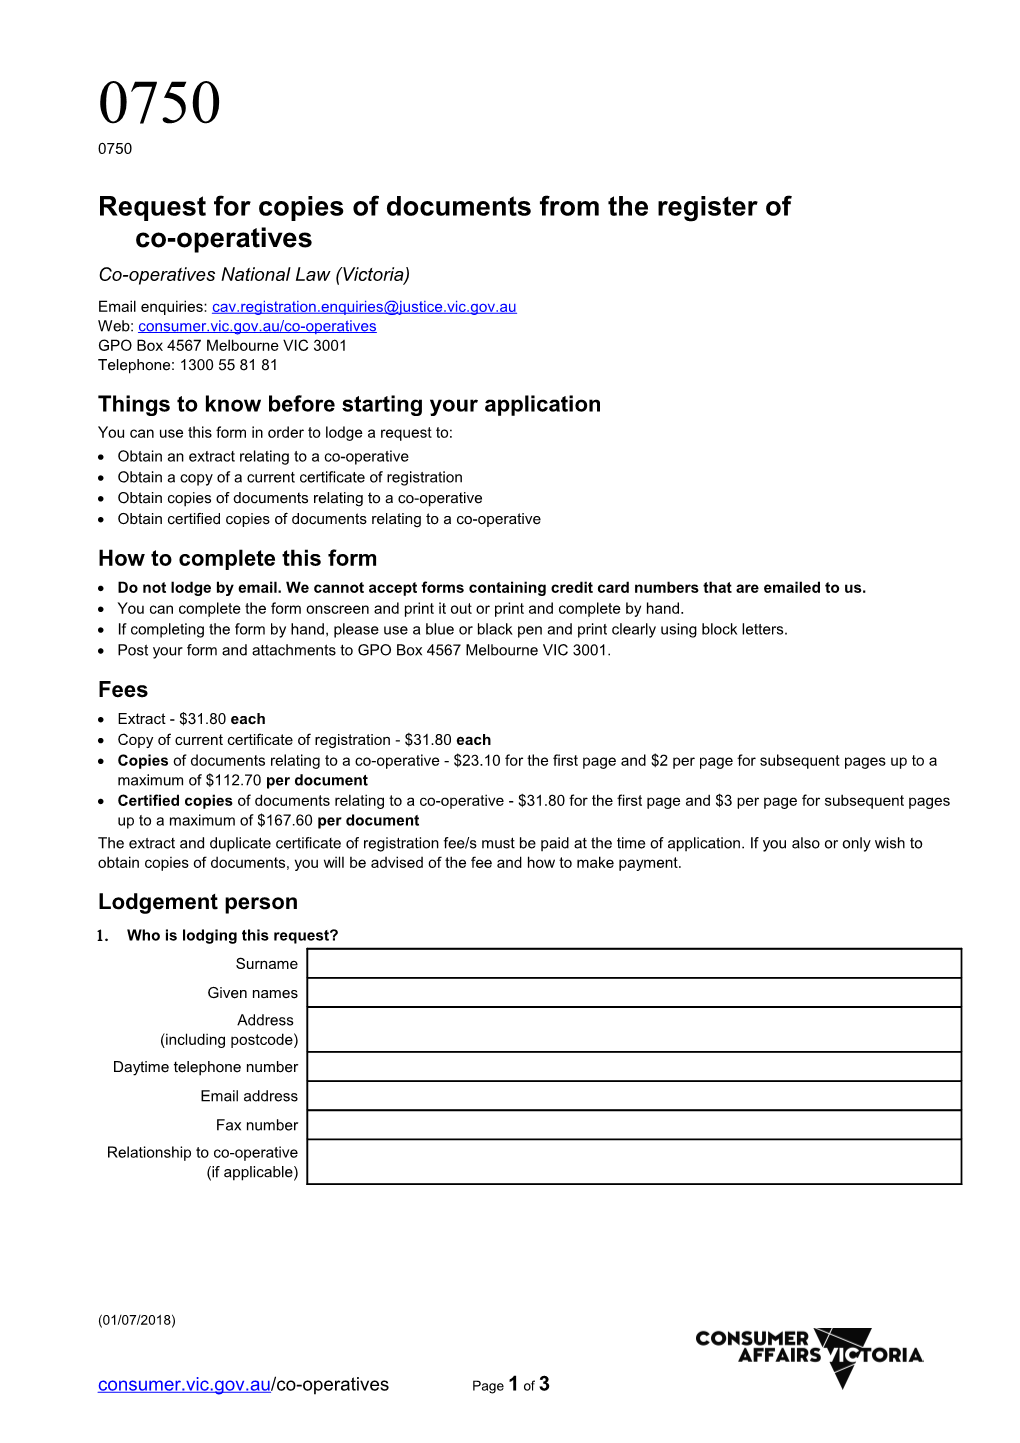 Request for Copies of Documents from the Register of Co-Operatives